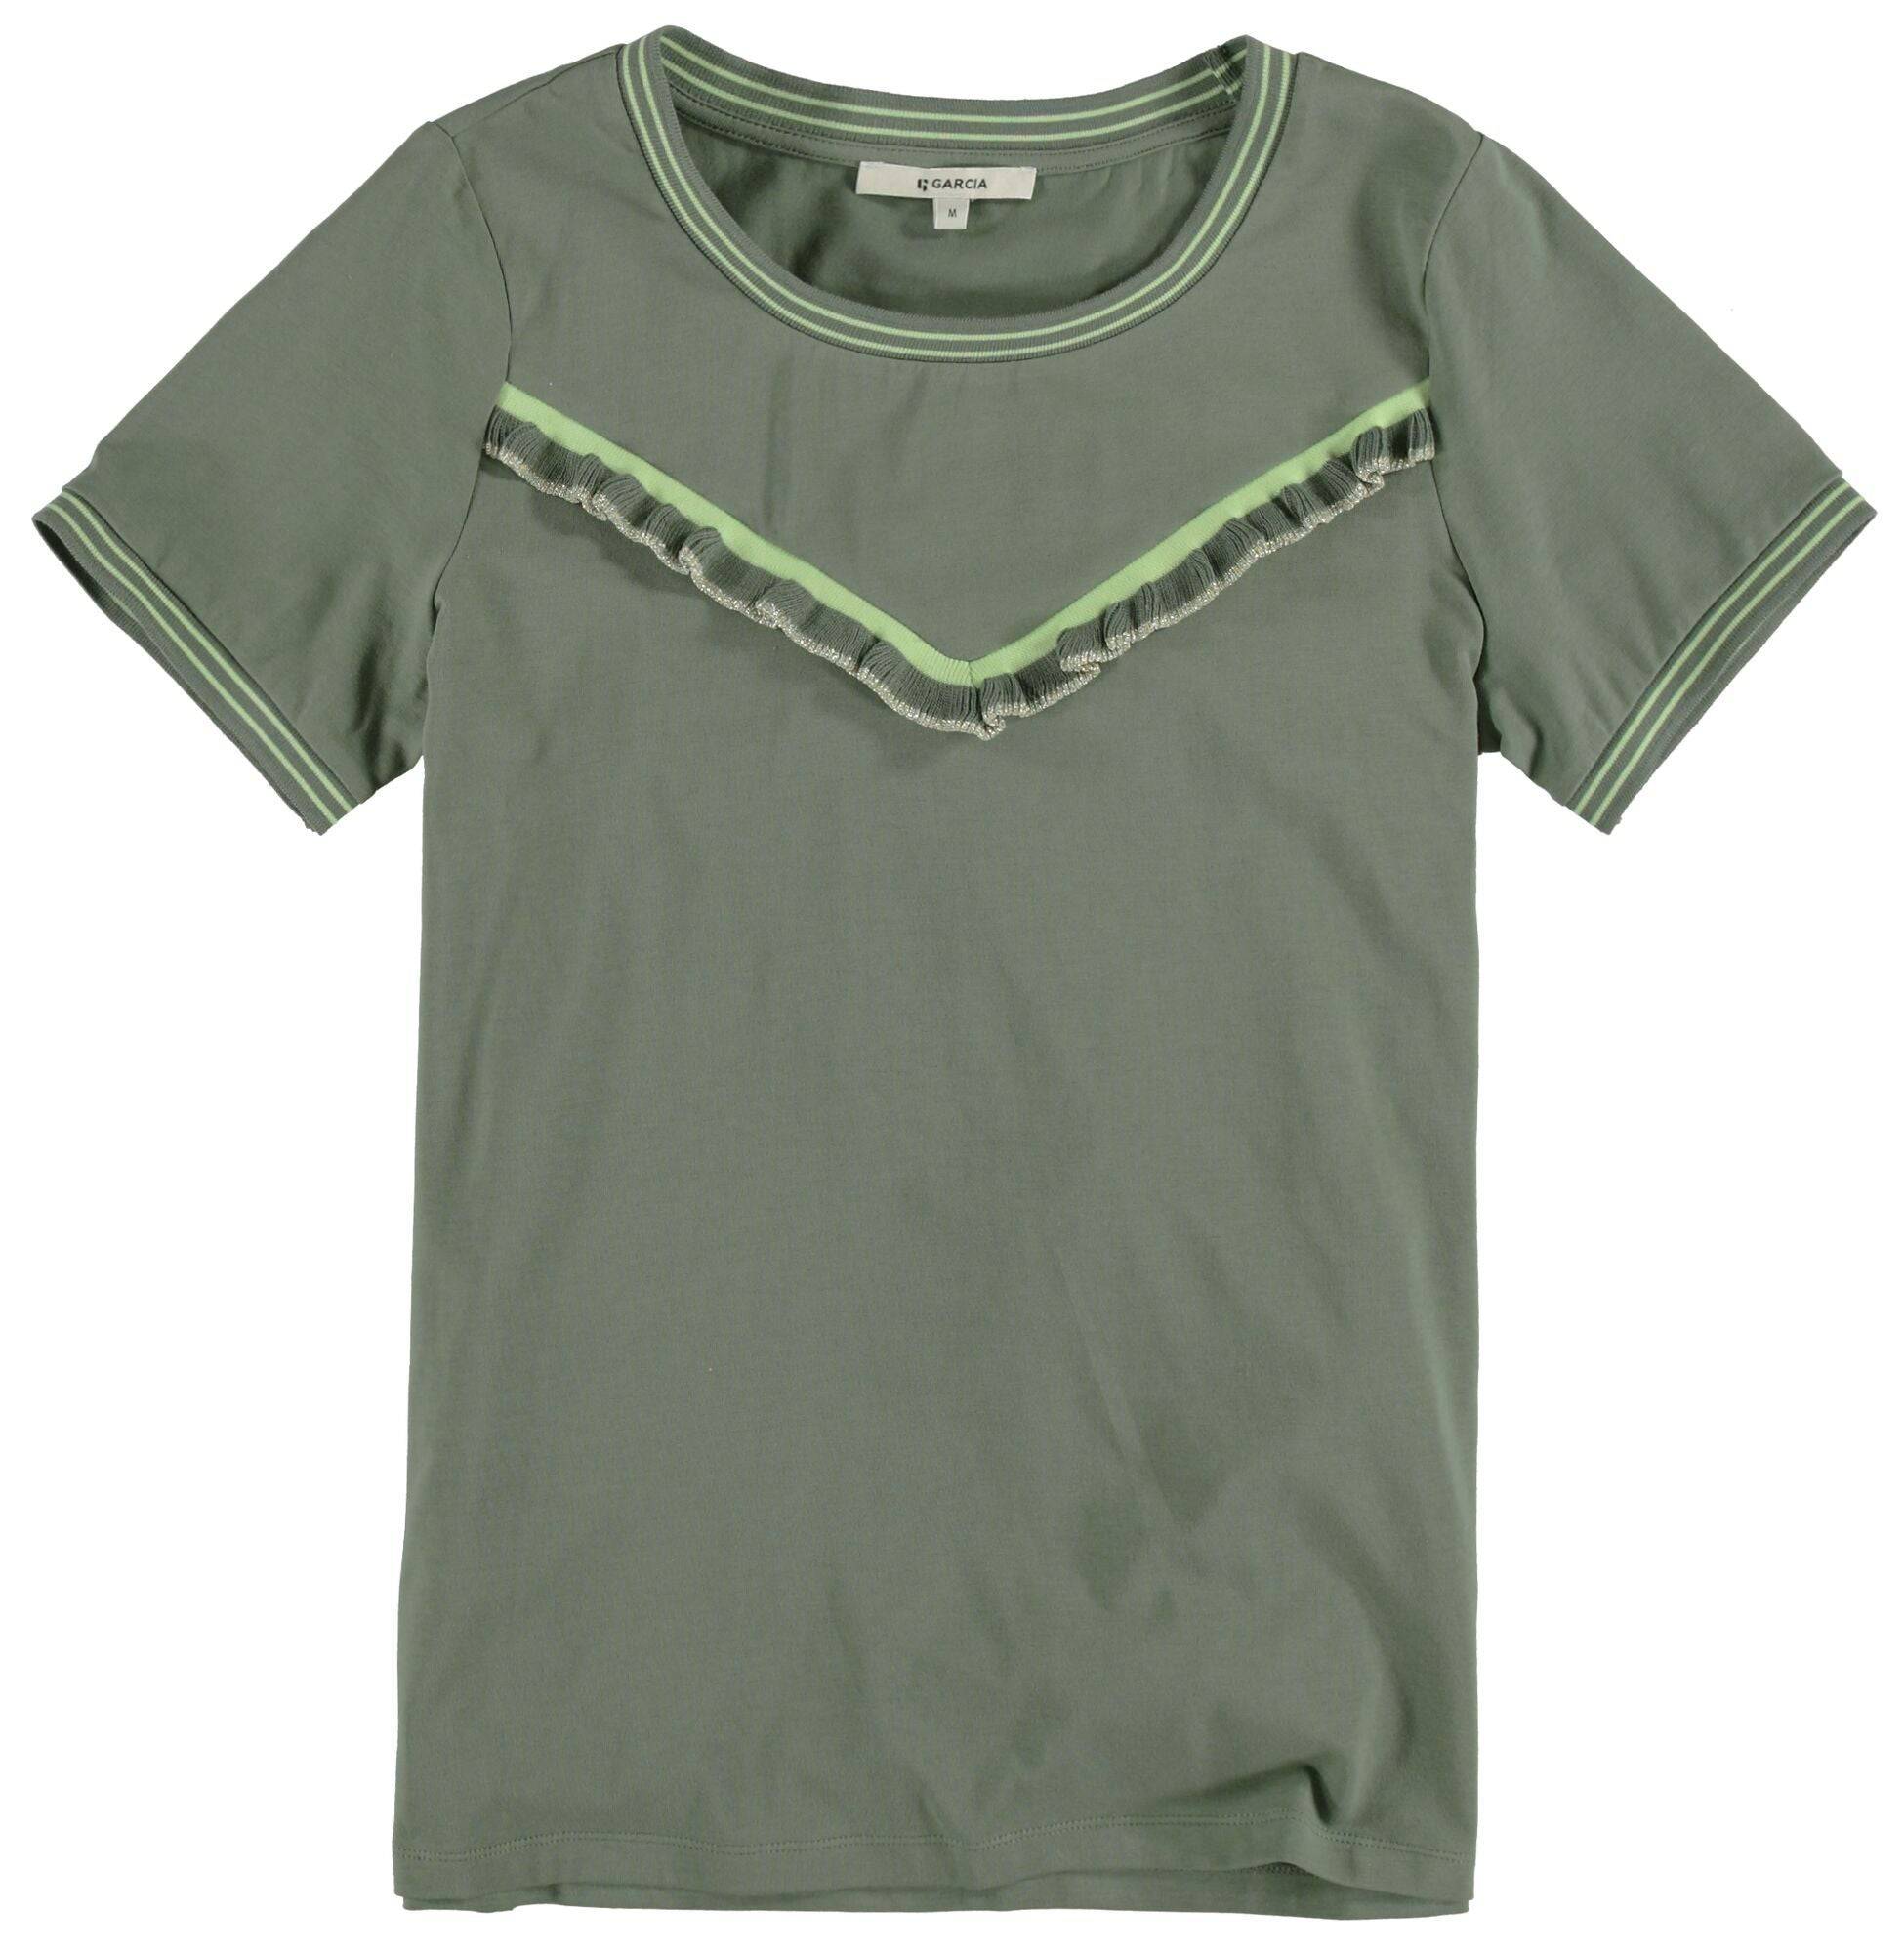 Garcia Army Green T-shirt - Your Style Your Story